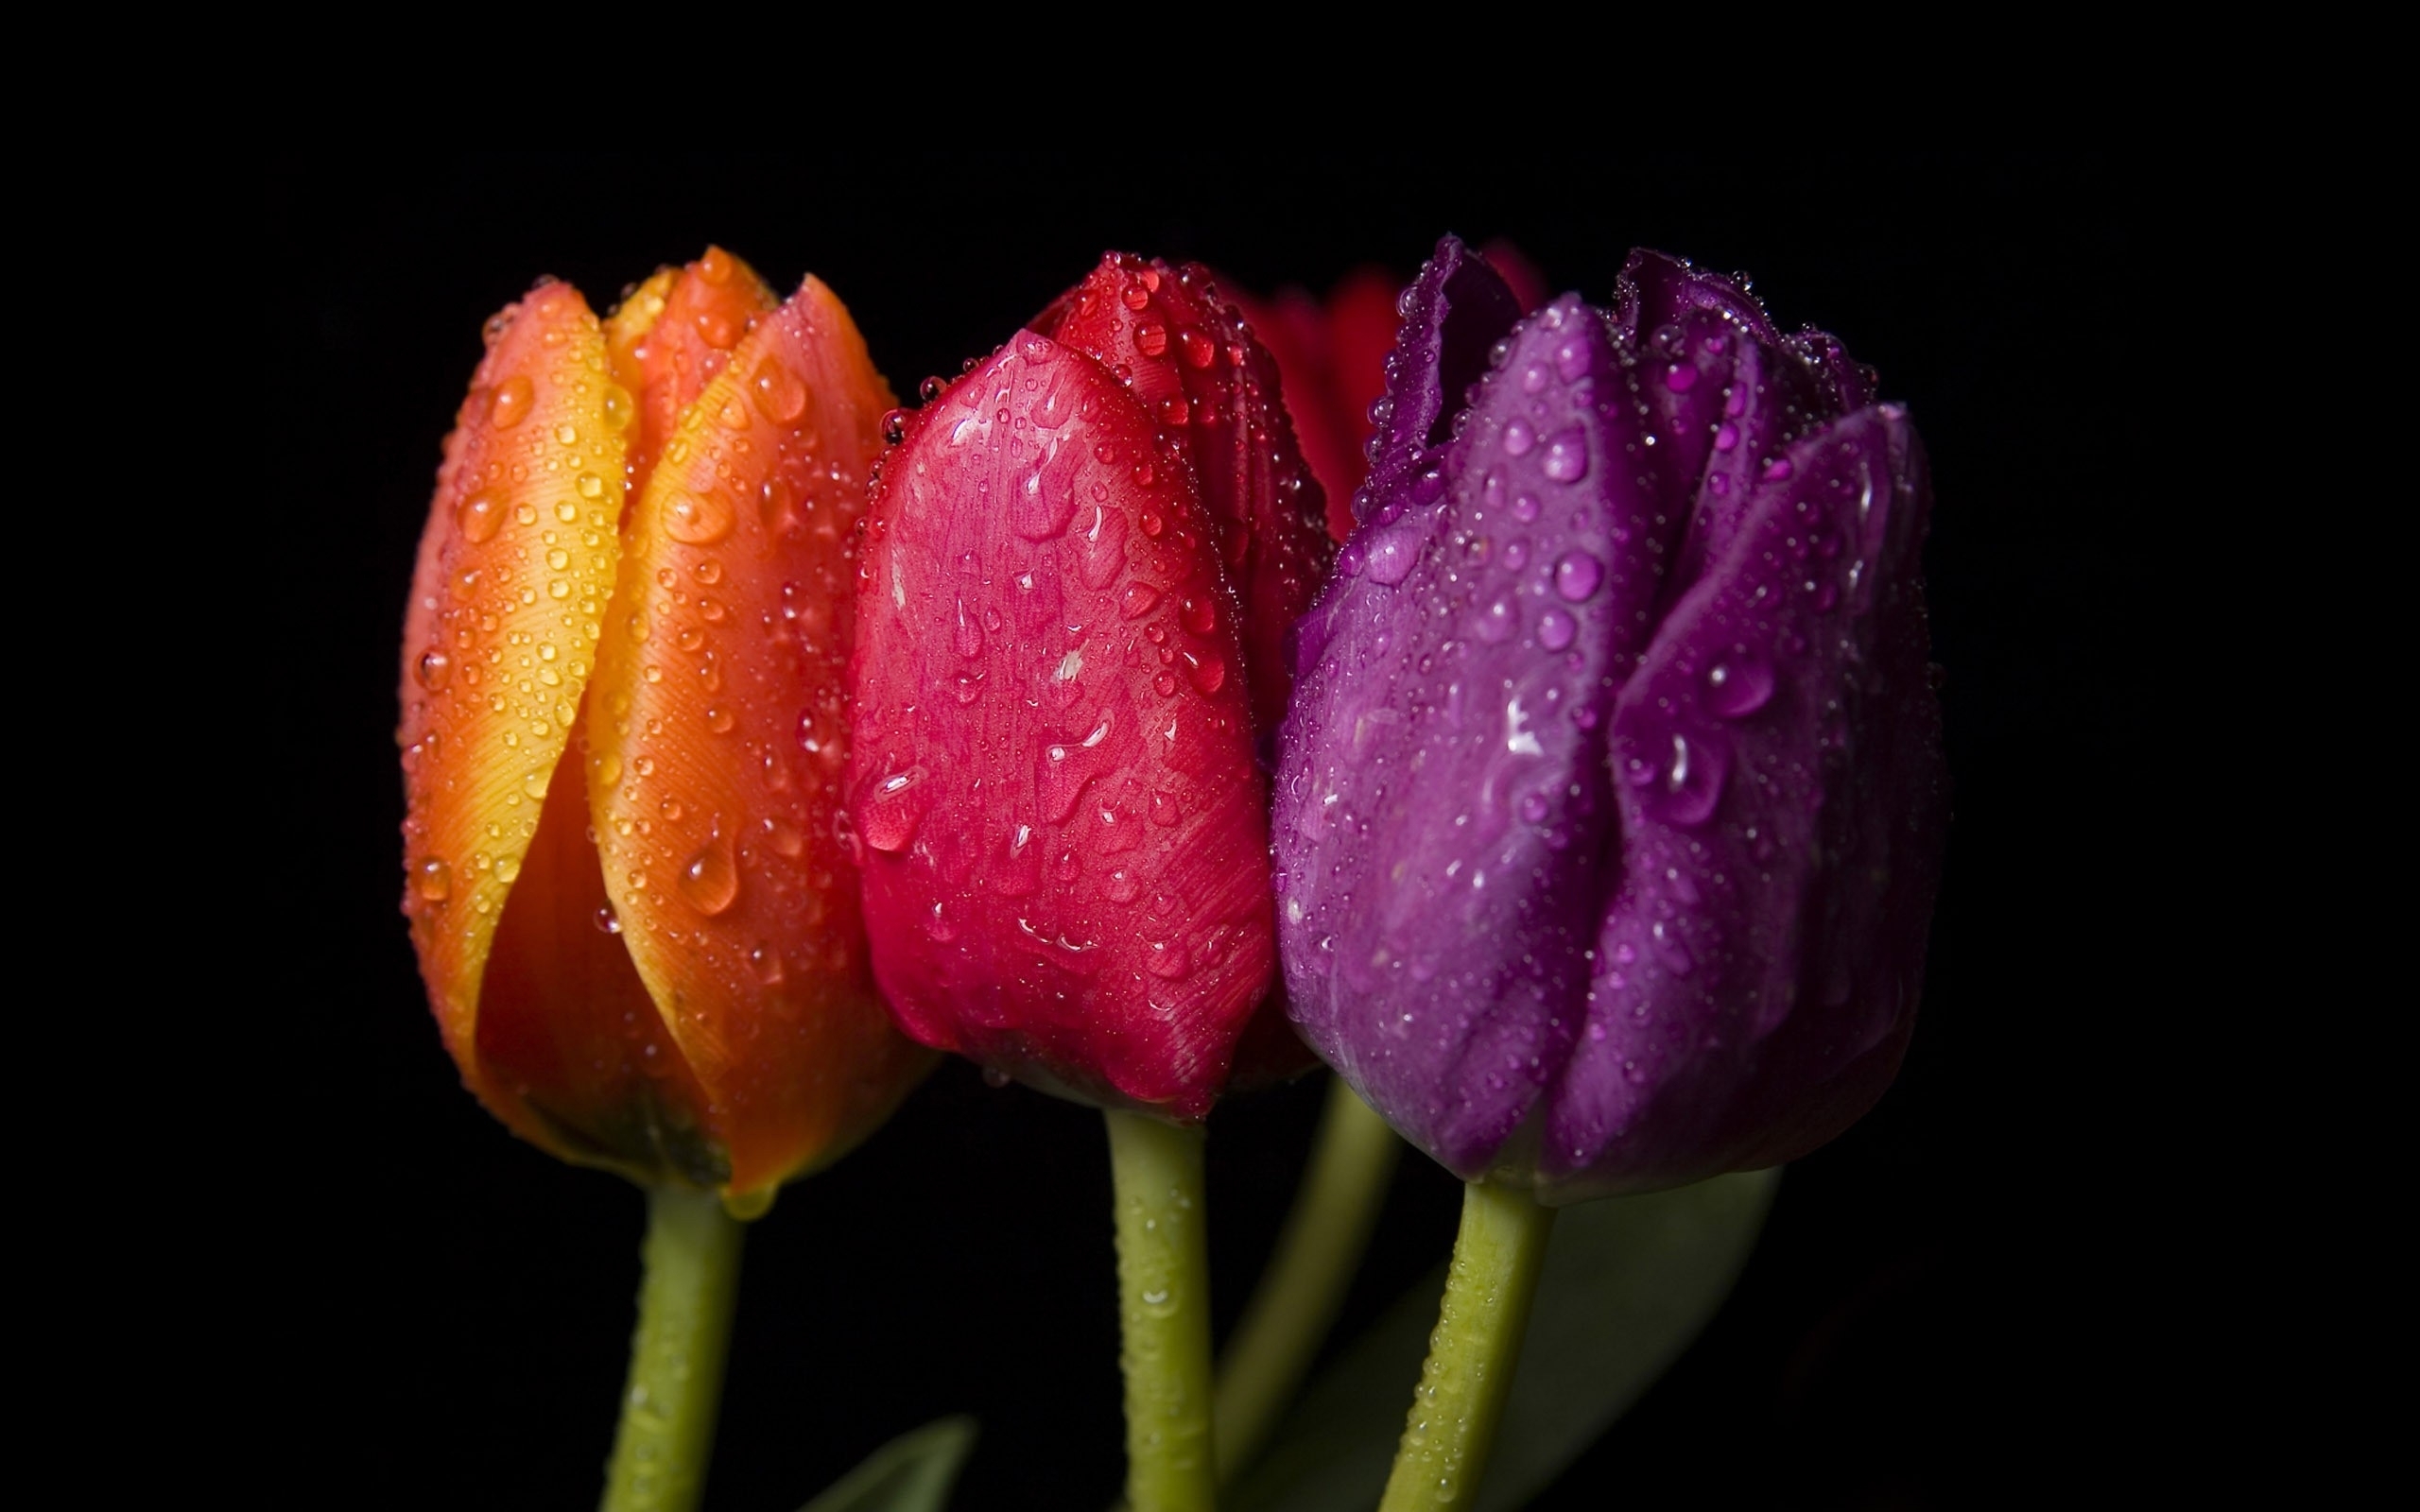 Nature Flowers Tulips Water Drops Black Background Red Orange And Purple 869039 Hd Wallpaper Backgrounds Download